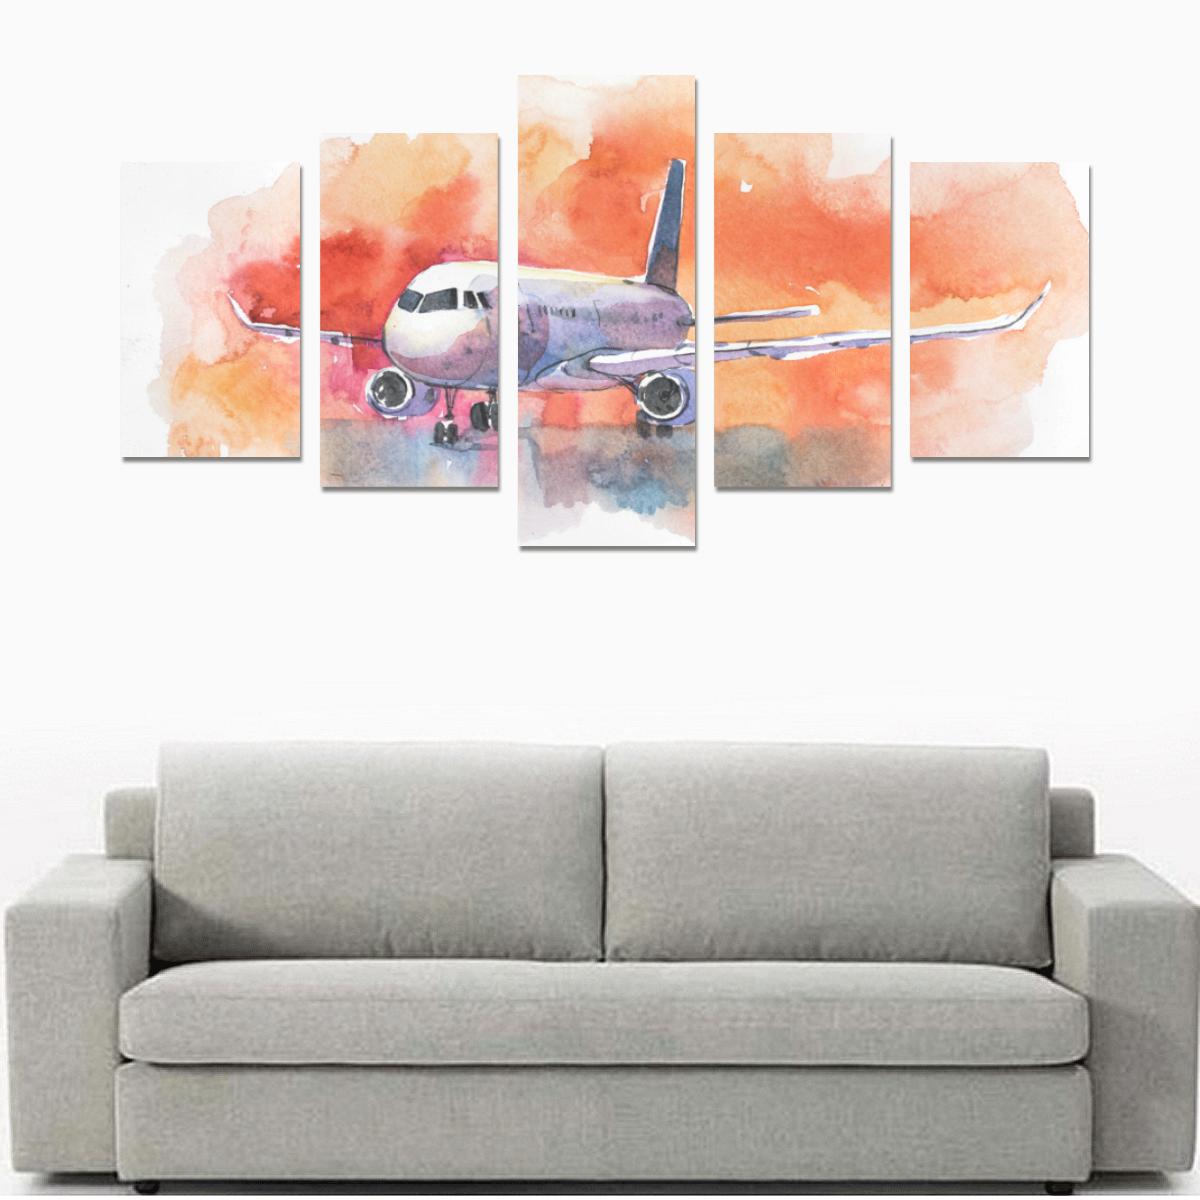 AIRCRAFT. AIRPLANE FLYING IN THE CLOUDY SKY. PASSE CANVAS PRINT SETS C (NO FRAME) THE AV8R